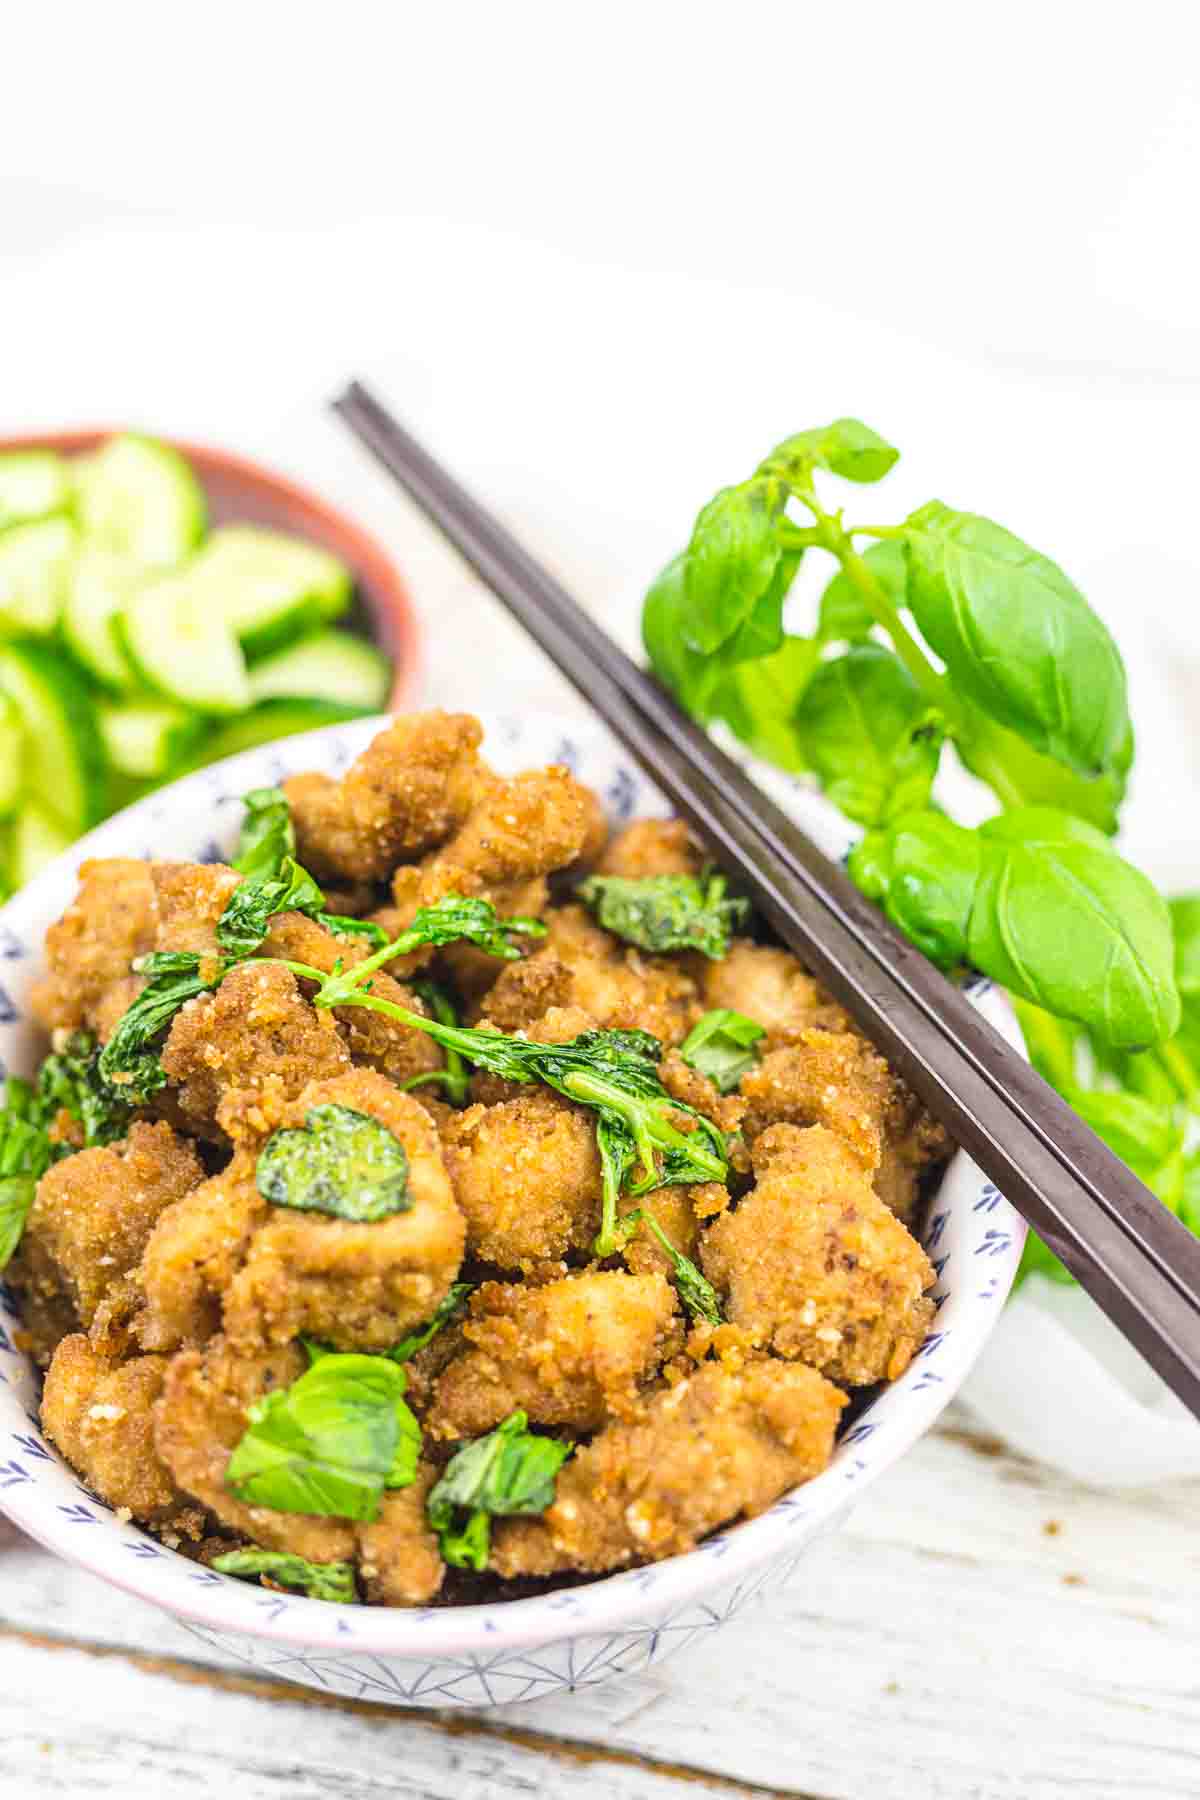 A bowl of breaded fried chicken with basil leaves, chopsticks on top, next to a bowl of sliced cucumbers.